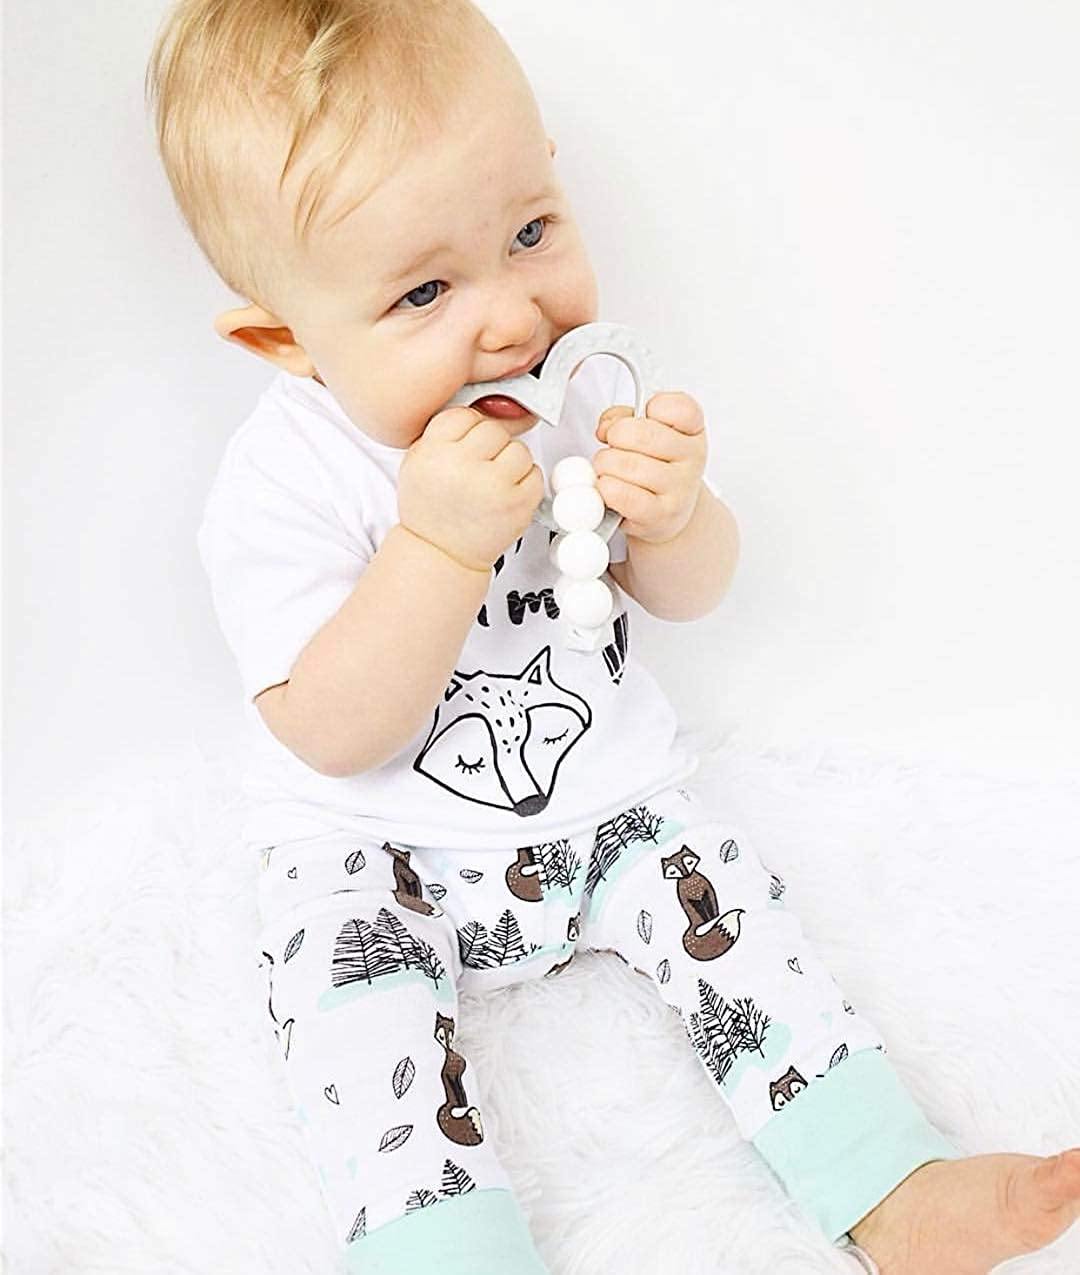 Little Dreamer Outfit - Tops + Pants (2pcs) - Our Baby Nursery